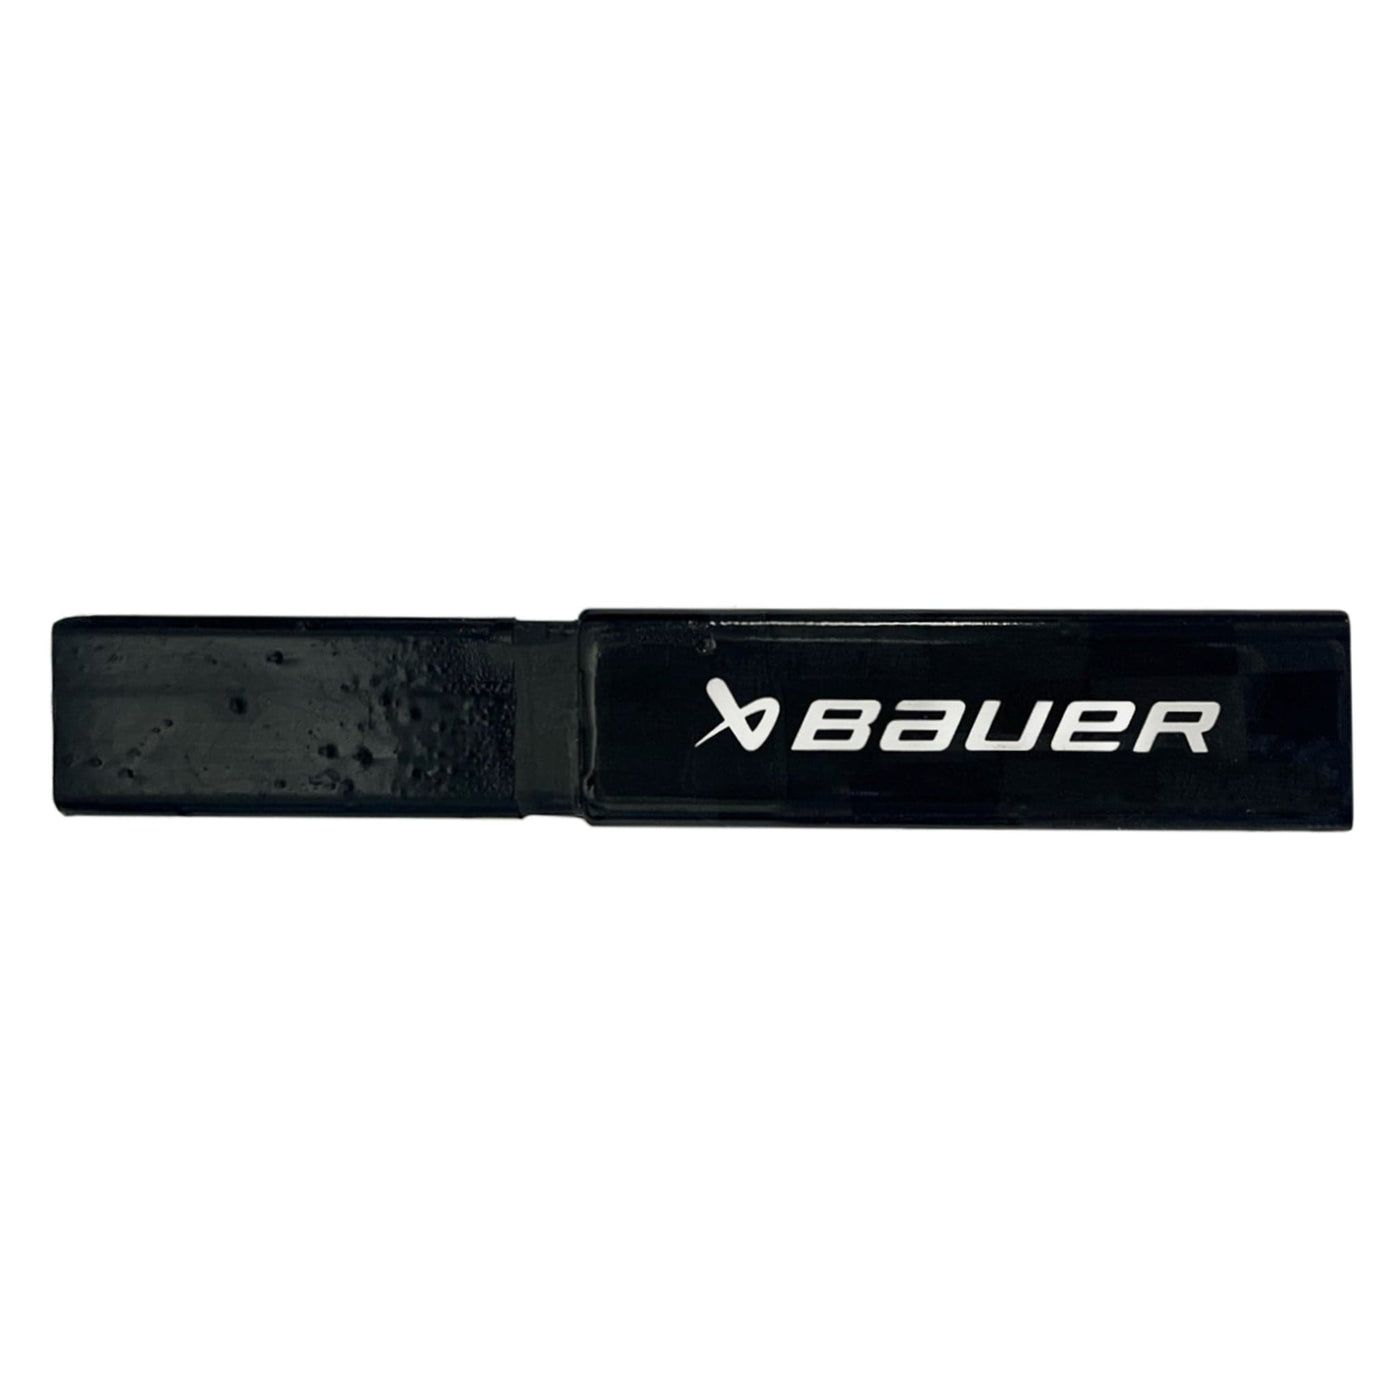 Bauer Nexus Butt End used for adding length to a stick. Stick extension, butt end, longer stick, butt end plug, composite extension